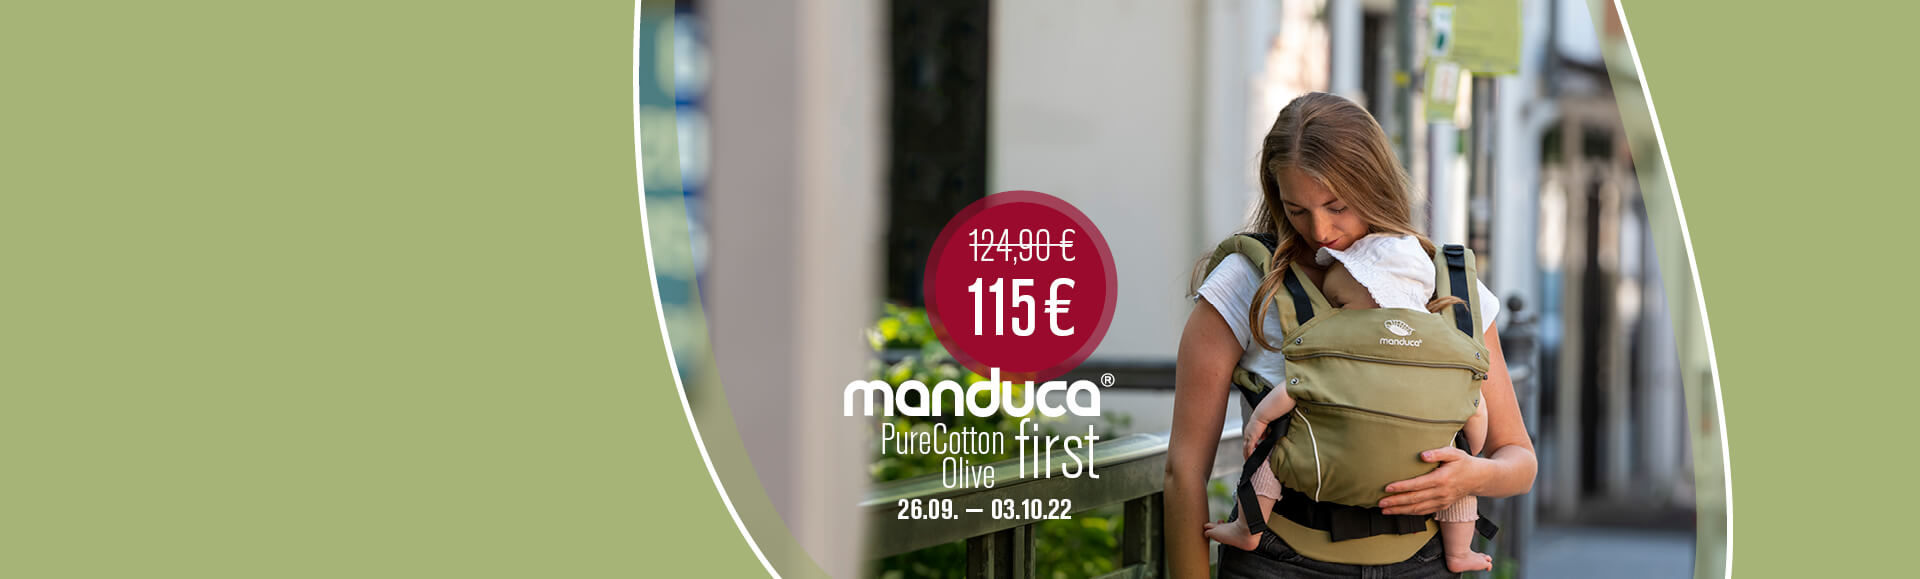 Deal of the week - manduca® first PureCotton olive